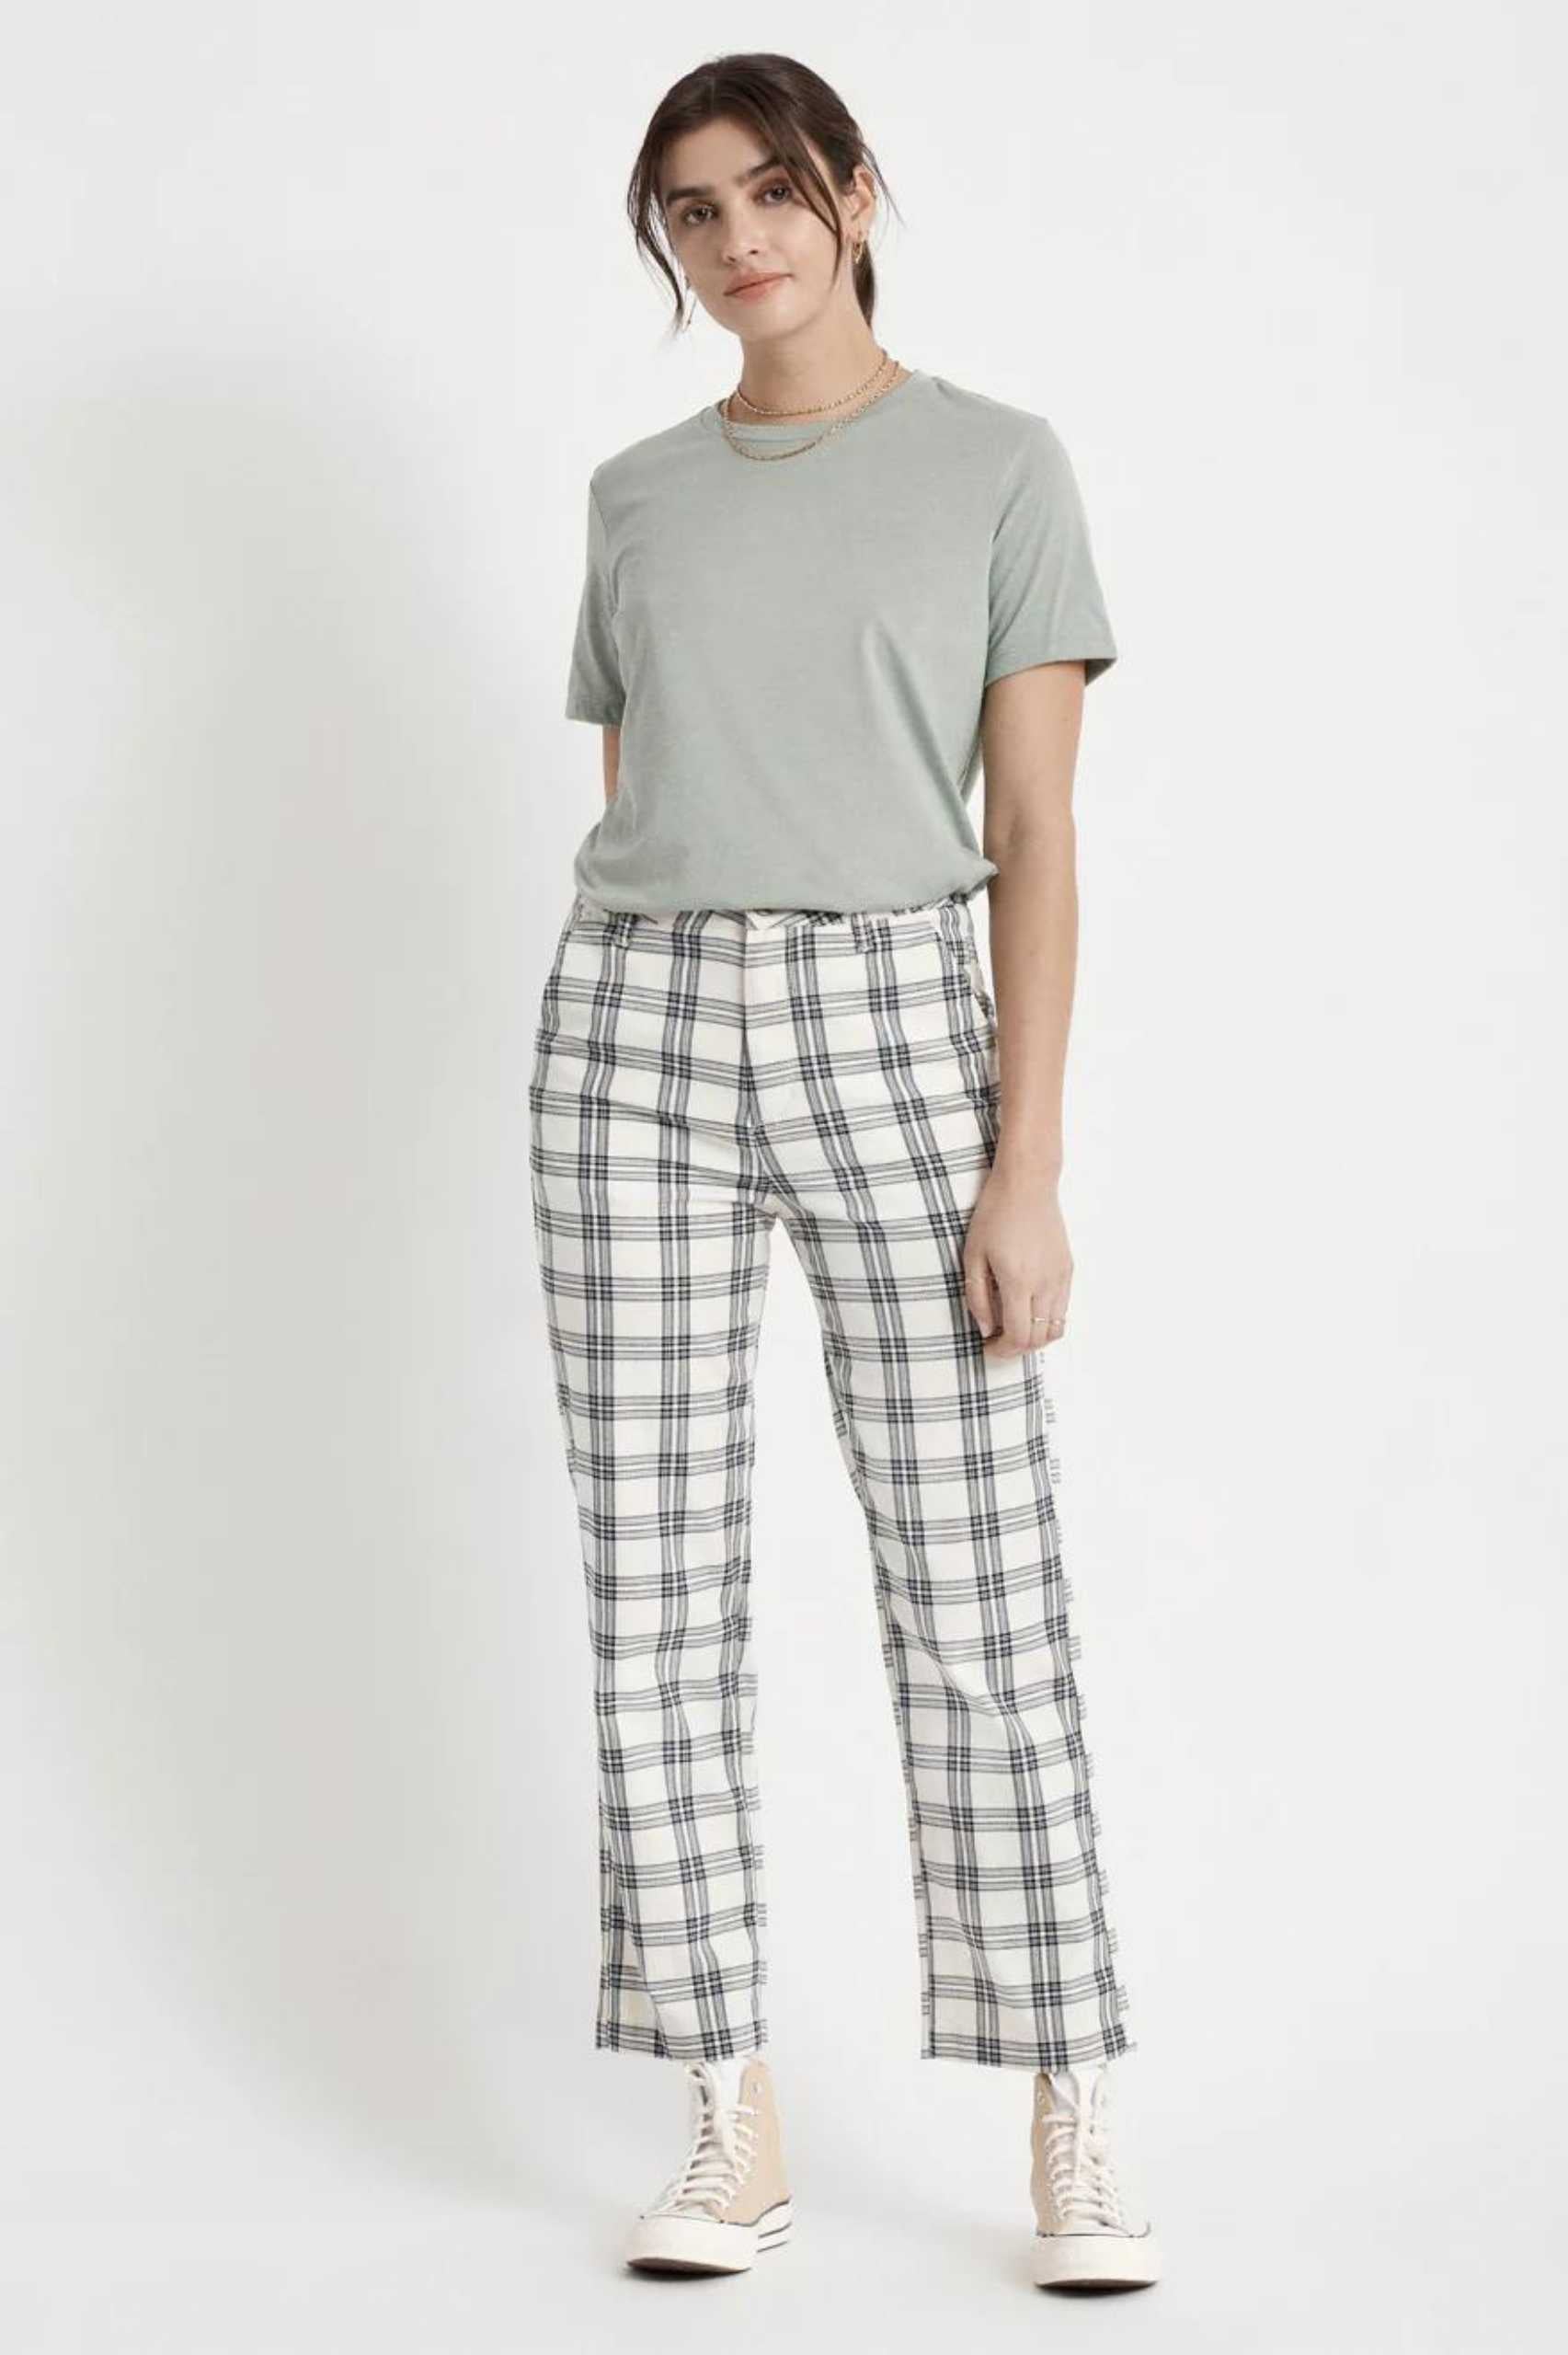 Brixton Womens Victory Pant in White/Plaid